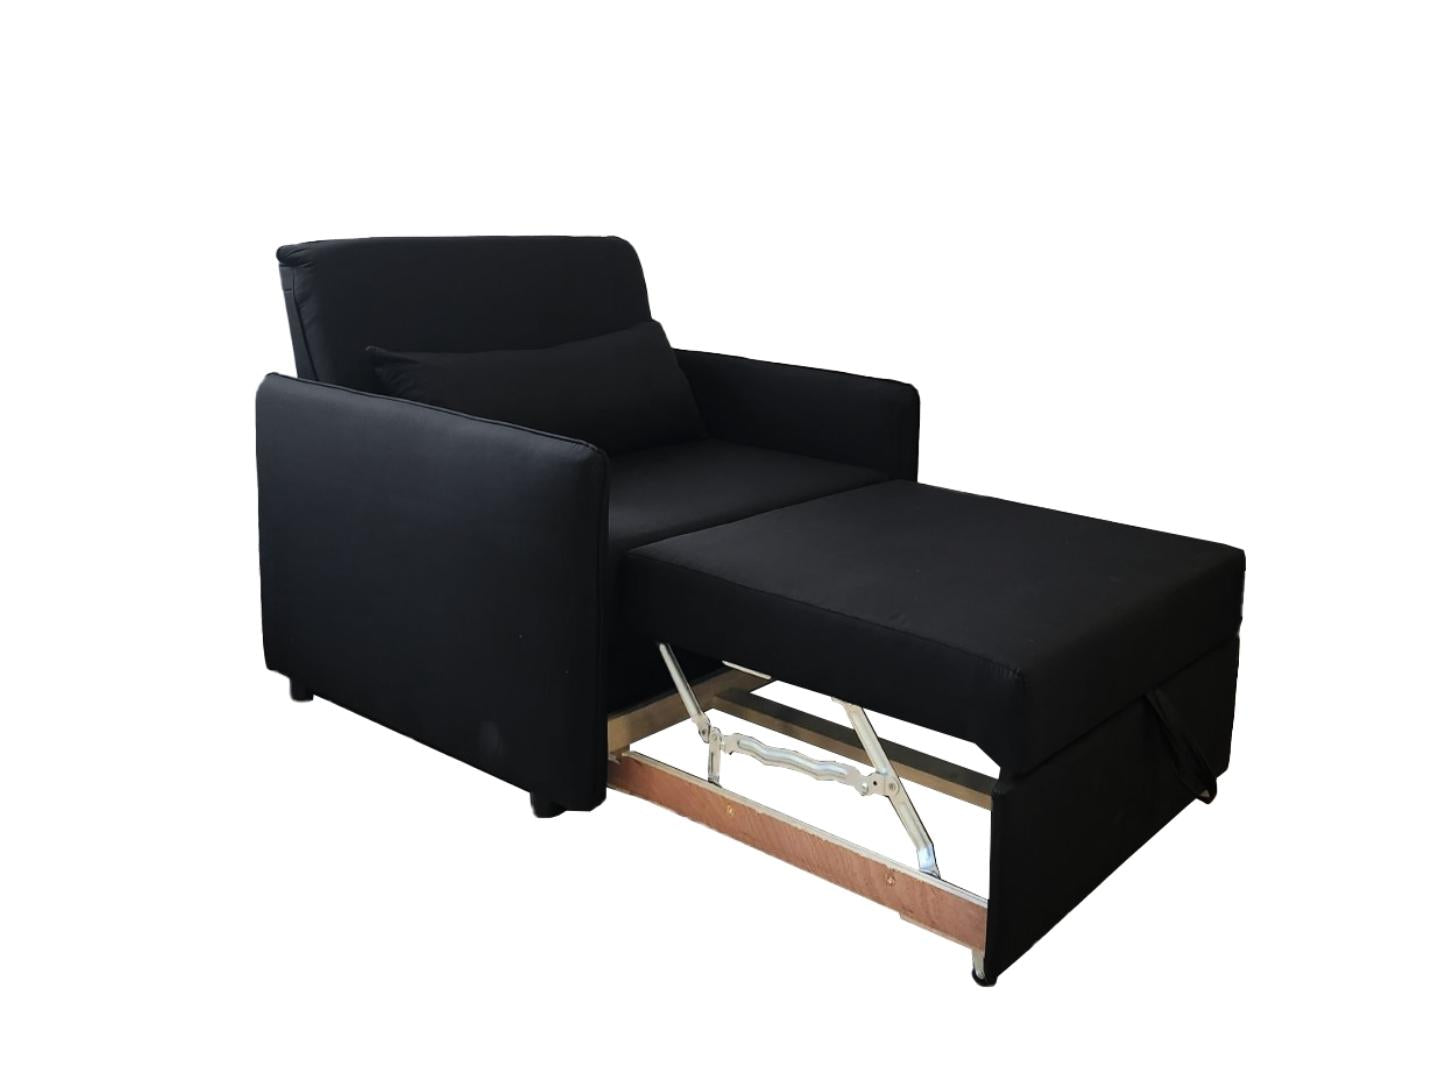 armchair single bed recliner sofa bed / Black